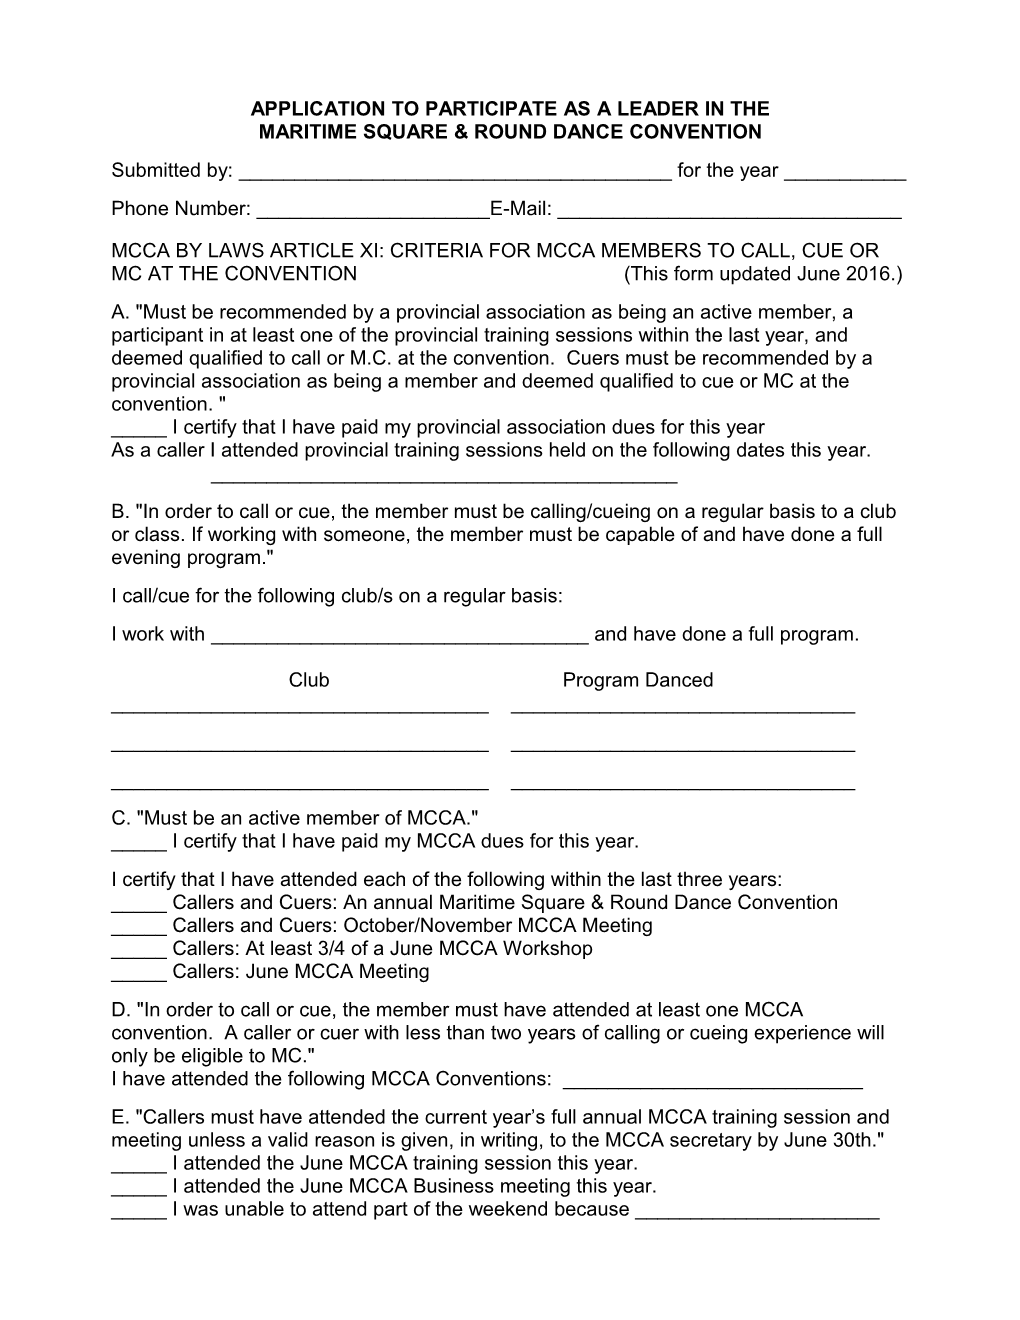 Application to Participate in the November Mcca Convention